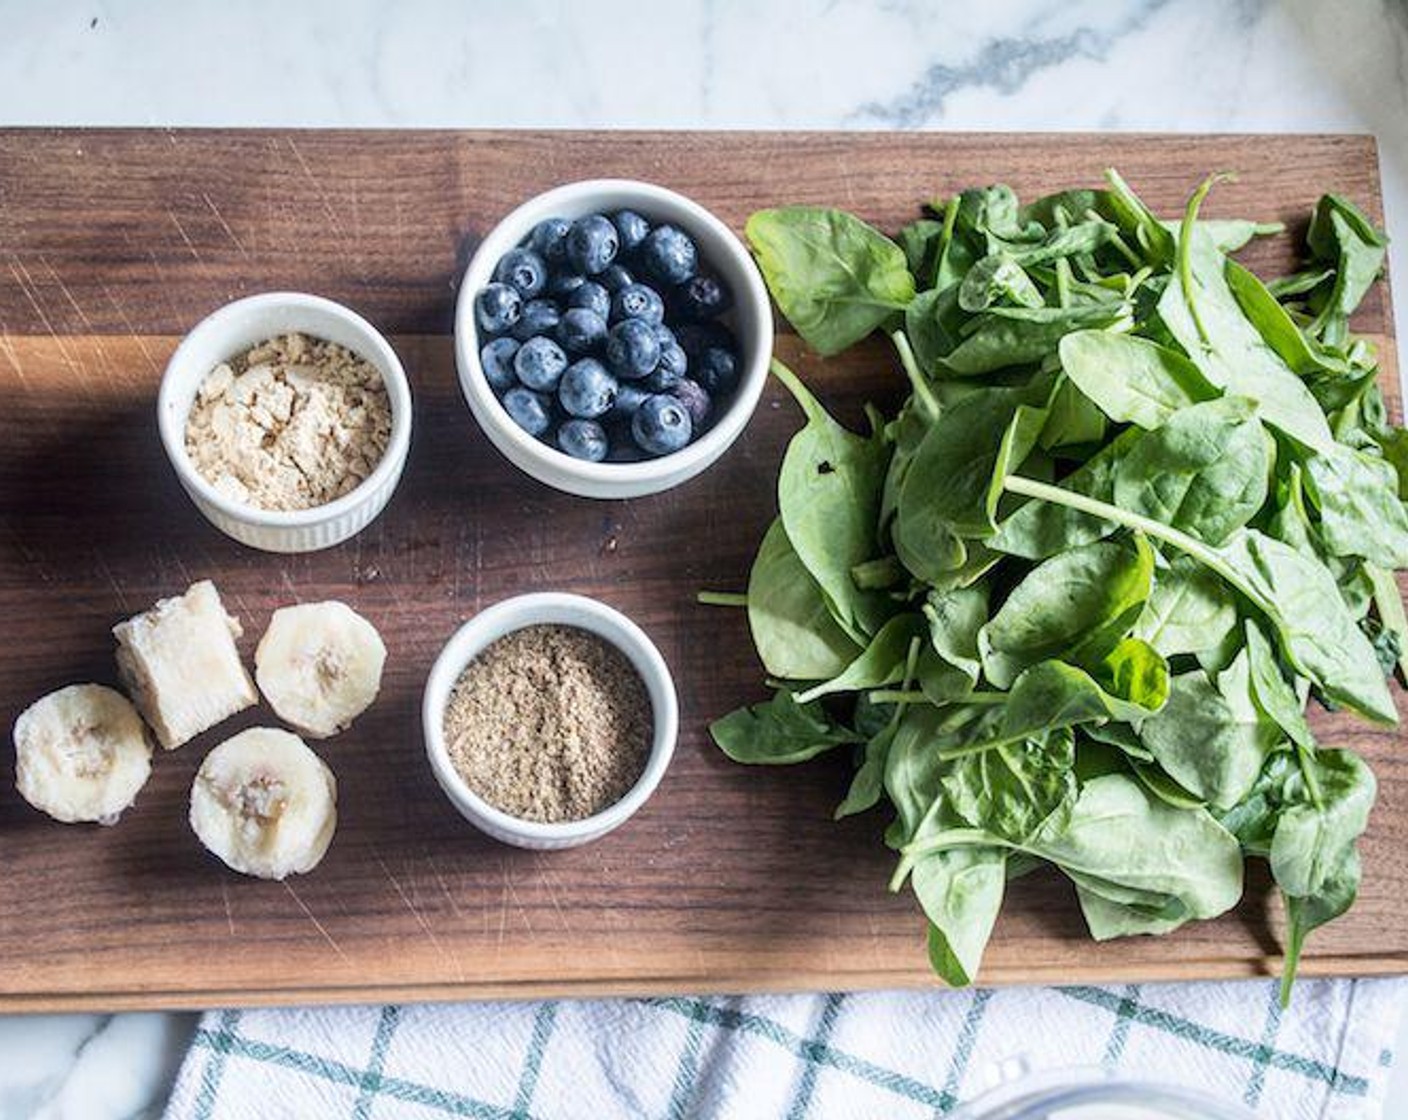 step 1 Add Unsweetened Vanilla Almond Milk (1 cup), Ice (to taste), Banana (1/2), Frozen Blueberries (1/2 cup), Ground Flaxseed (2 Tbsp), Powdered Peanut Butter (2 Tbsp), Stevia (3 pckg), and Fresh Spinach (2 cups) to blender or Ninja smoothie attachment, blend on high for 40-60 seconds.